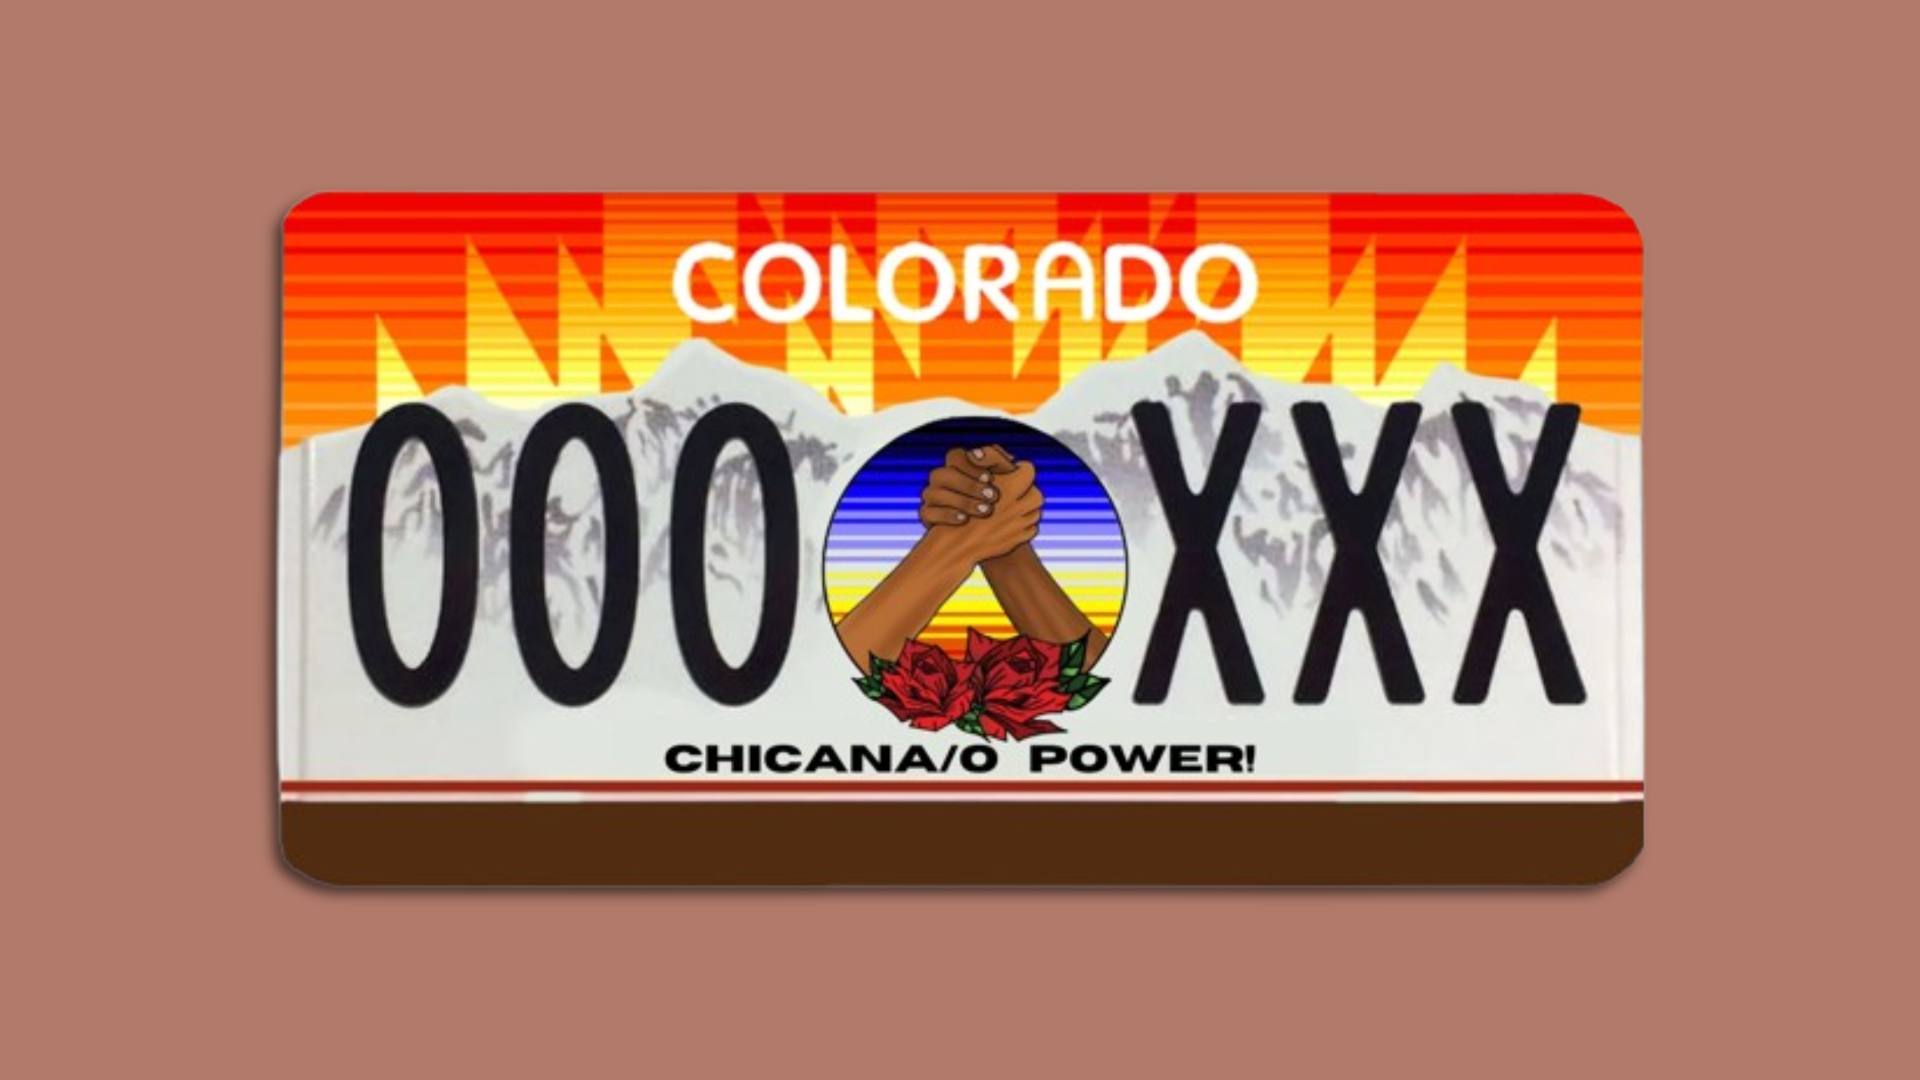 An illustration of an orange and brown Colorado license plate with two brown-skinned arms claps hands in the middle and "Chicana/o Power!" written underneath it.